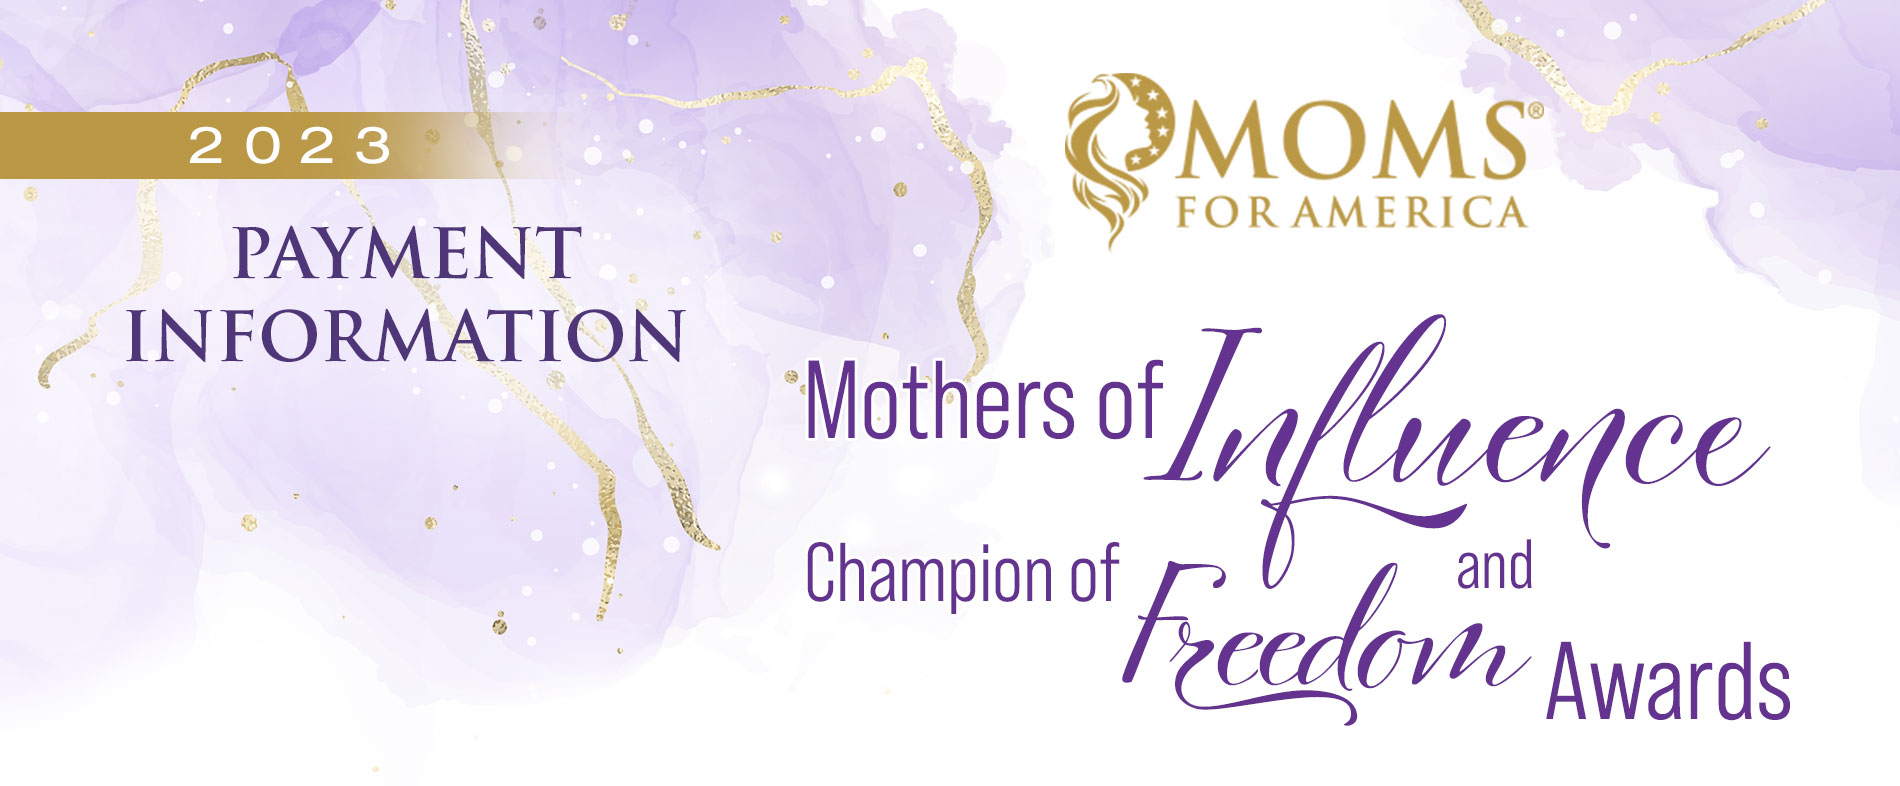 Mothers of Influence and Champion of Freedom Awards - Payment information Header